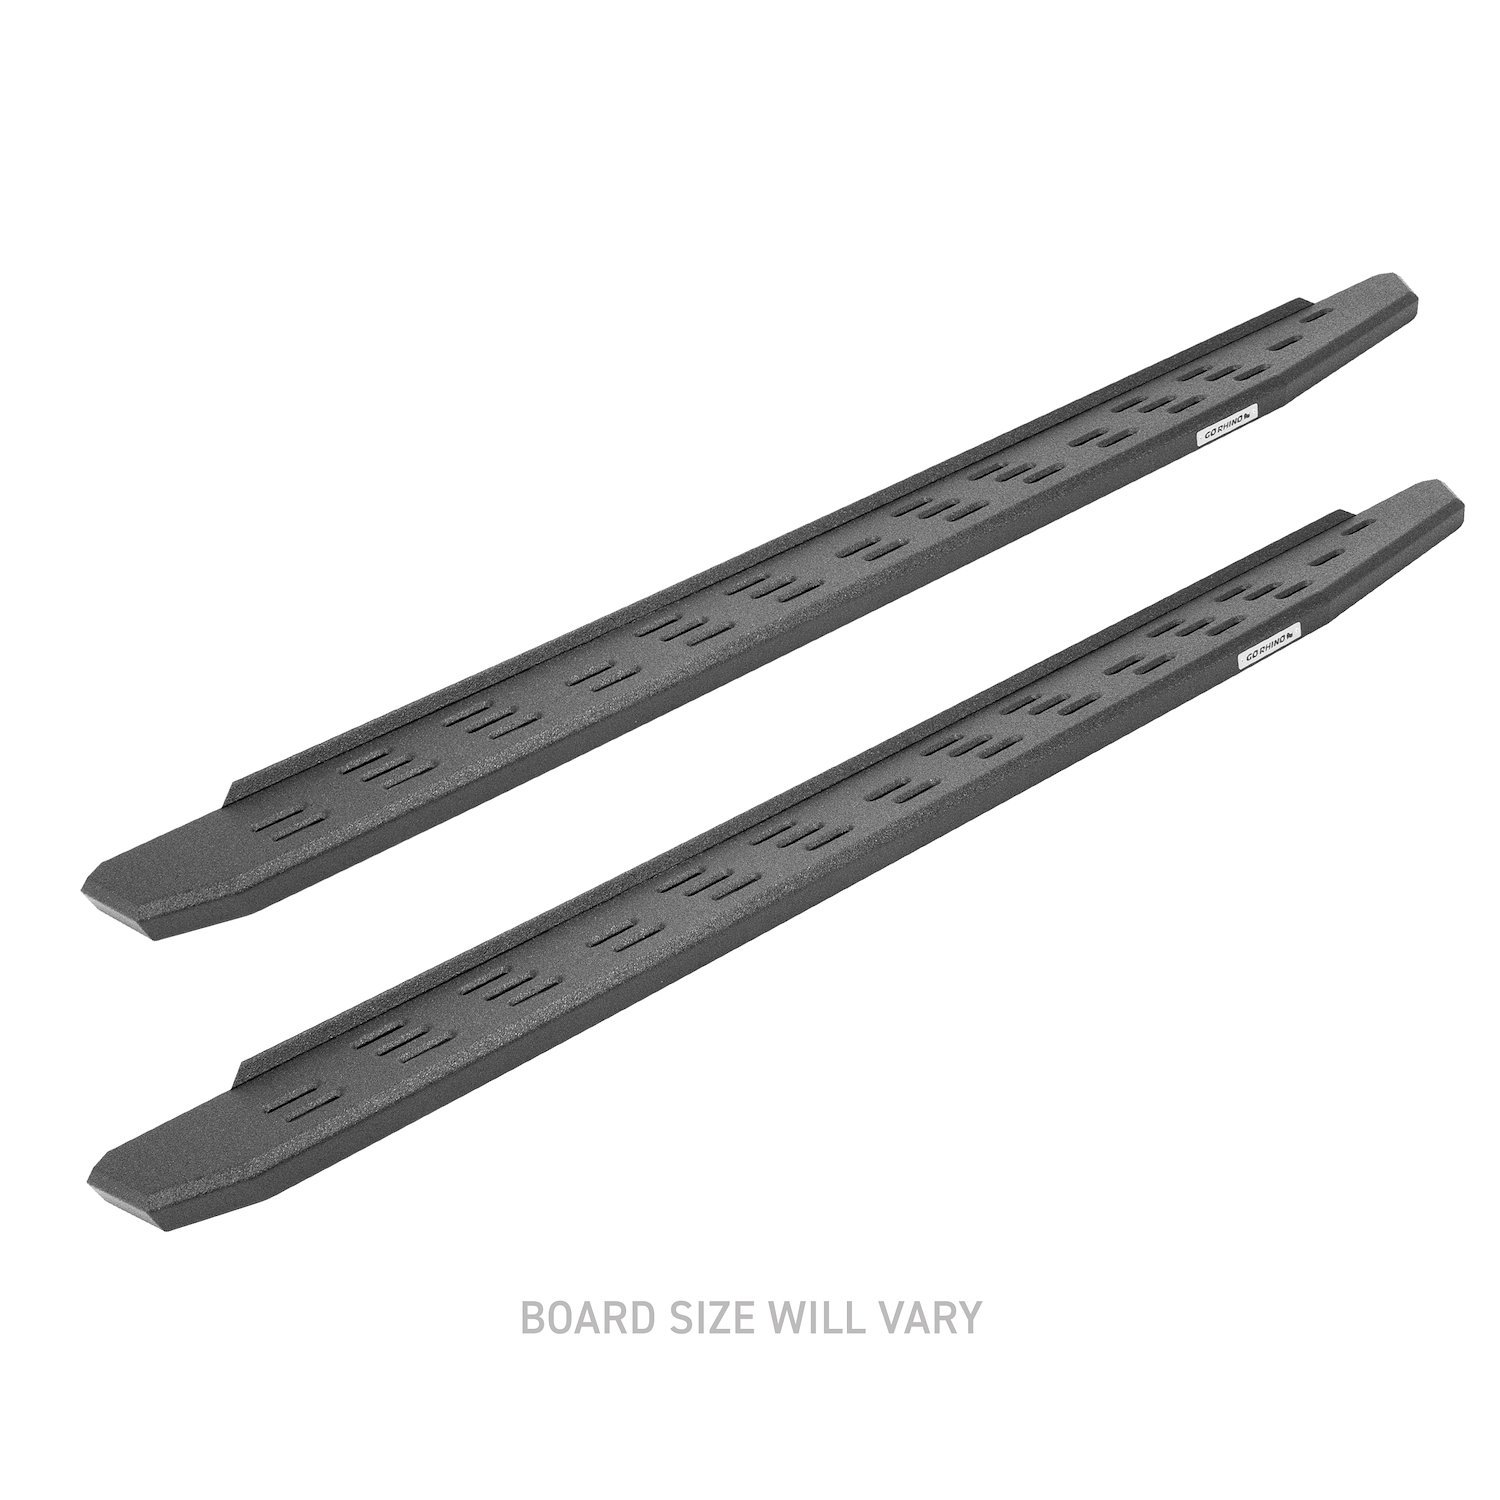 RB30 Running Boards w/Bracket Kit Fits Select Chevy Colorado, GMC Canyon Crew Cab [Bedliner-Coated]